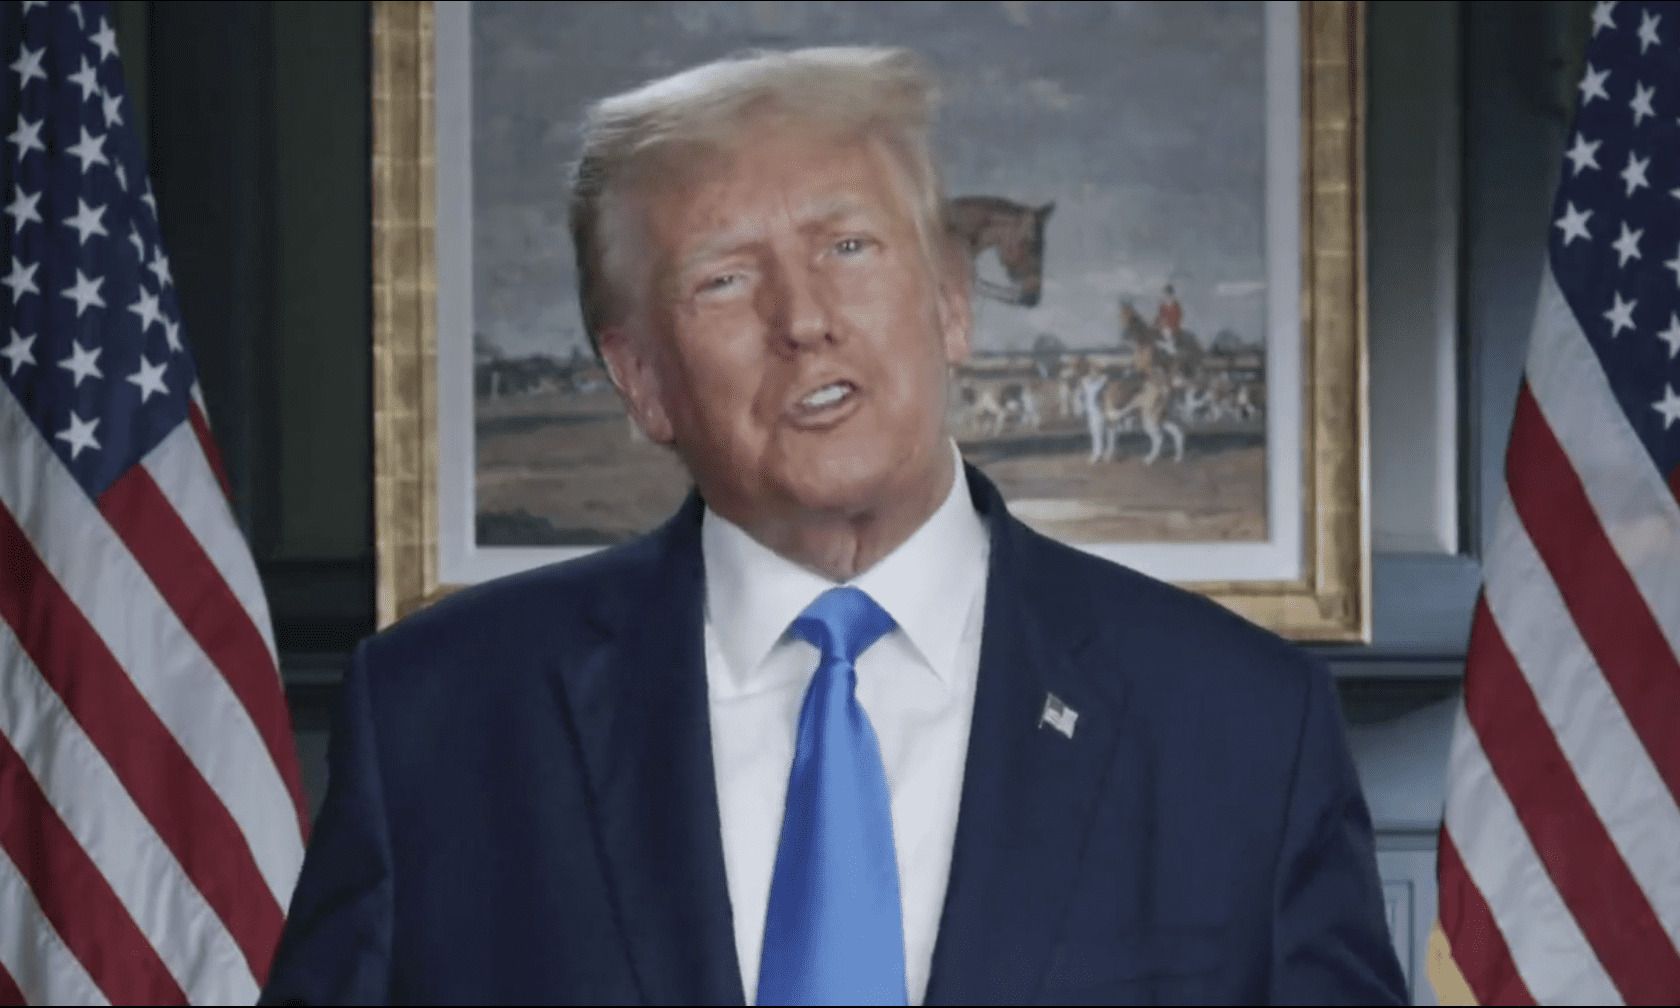 WATCH President Trump: "We Will NOT Comply!" | WLT Report